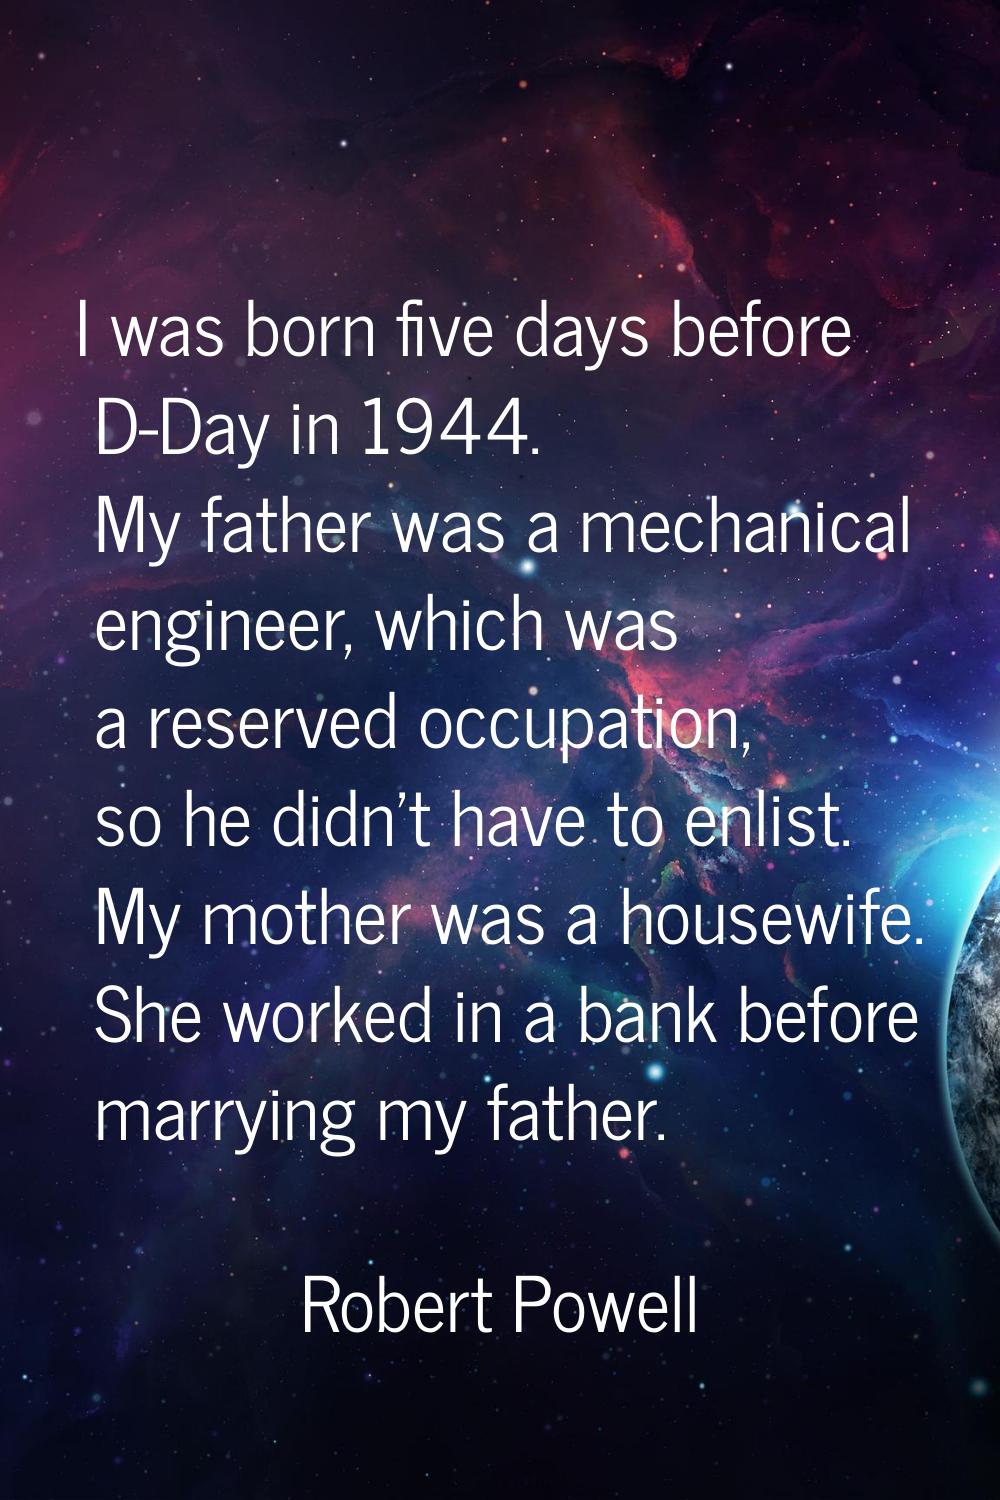 I was born five days before D-Day in 1944. My father was a mechanical engineer, which was a reserve